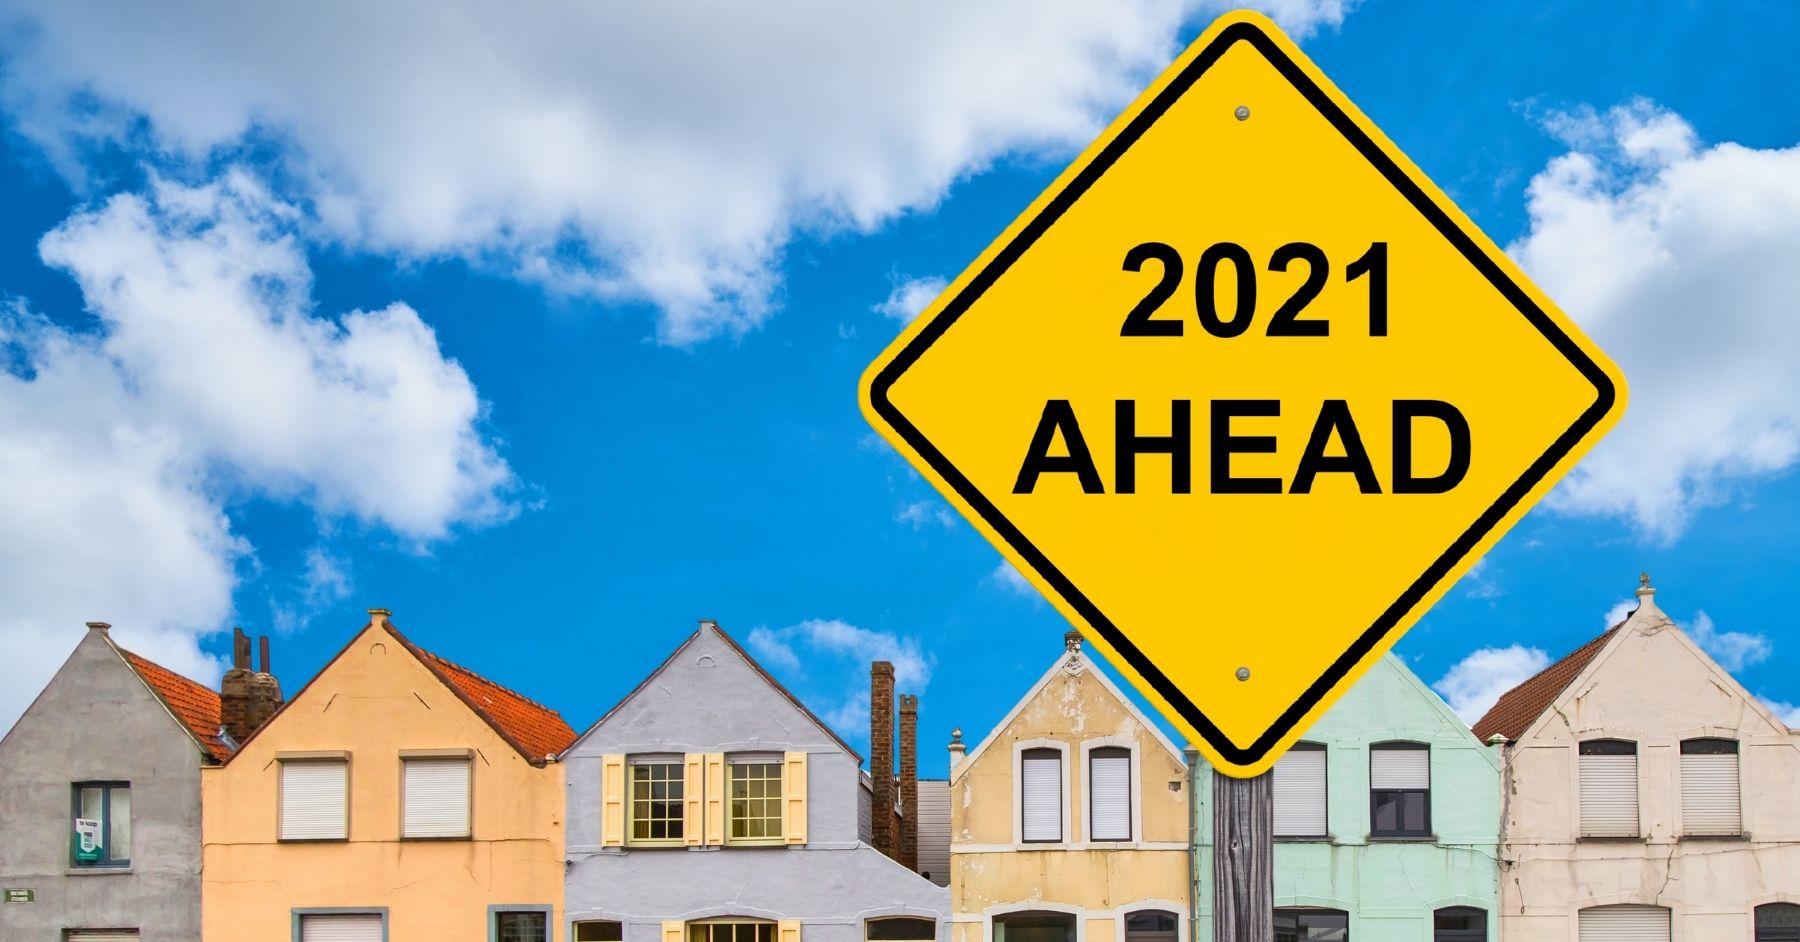 2021 Market Predictions Reddit - 2021 Thought Leader Predictions | Tony Mancini on Trends ... - Before we get into 2021 market predictions, let's do a 2020 recap.